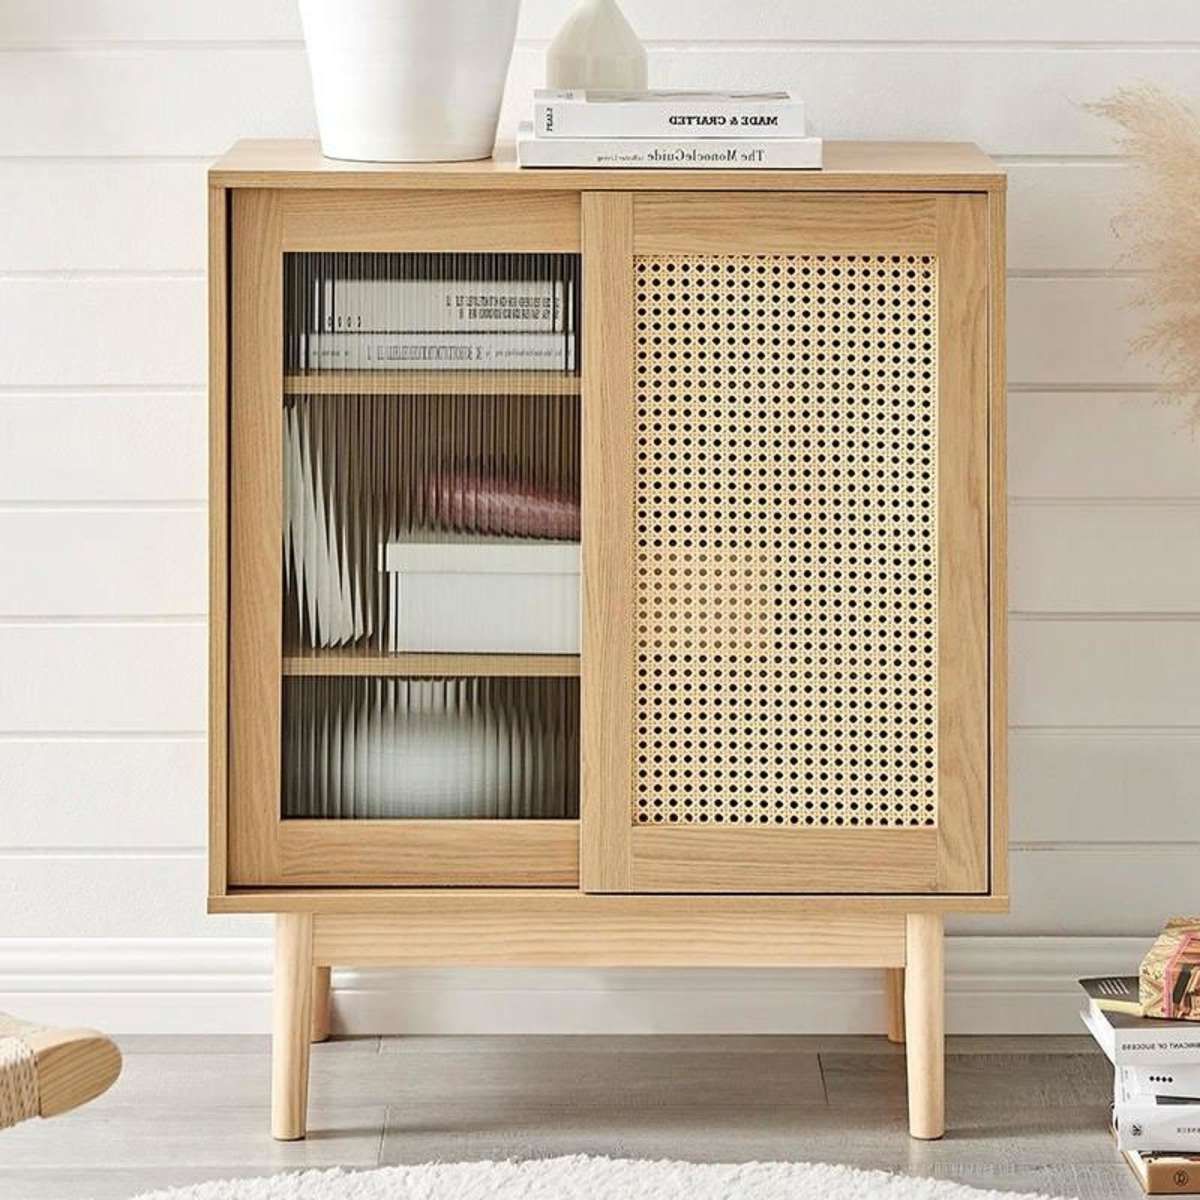 Preferred Furnic Rattan Buffet Sideboard Cabinet (natural) 1ea (View 2 of 15)